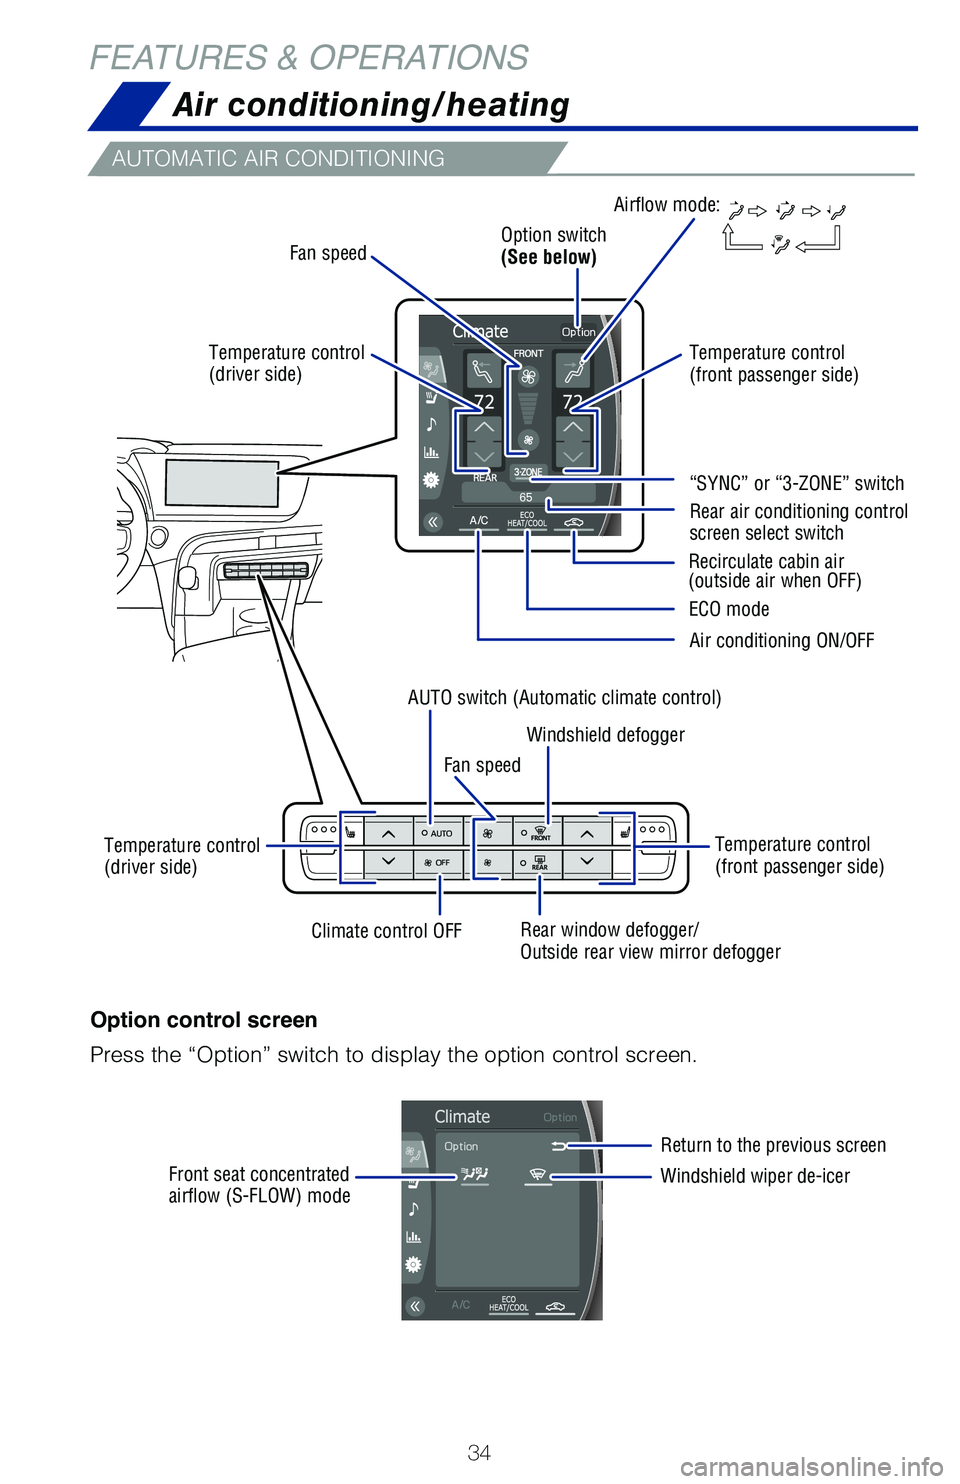 TOYOTA MIRAI 2021  Owners Manual (in English) 34
FEATURES & OPERATIONSAir conditioning/heating
AUTOMATIC AIR CONDITIONING
Temperature control   
(driver side)
Temperature control   
(driver side) Option switch 
(See below)
Temperature control 
(f